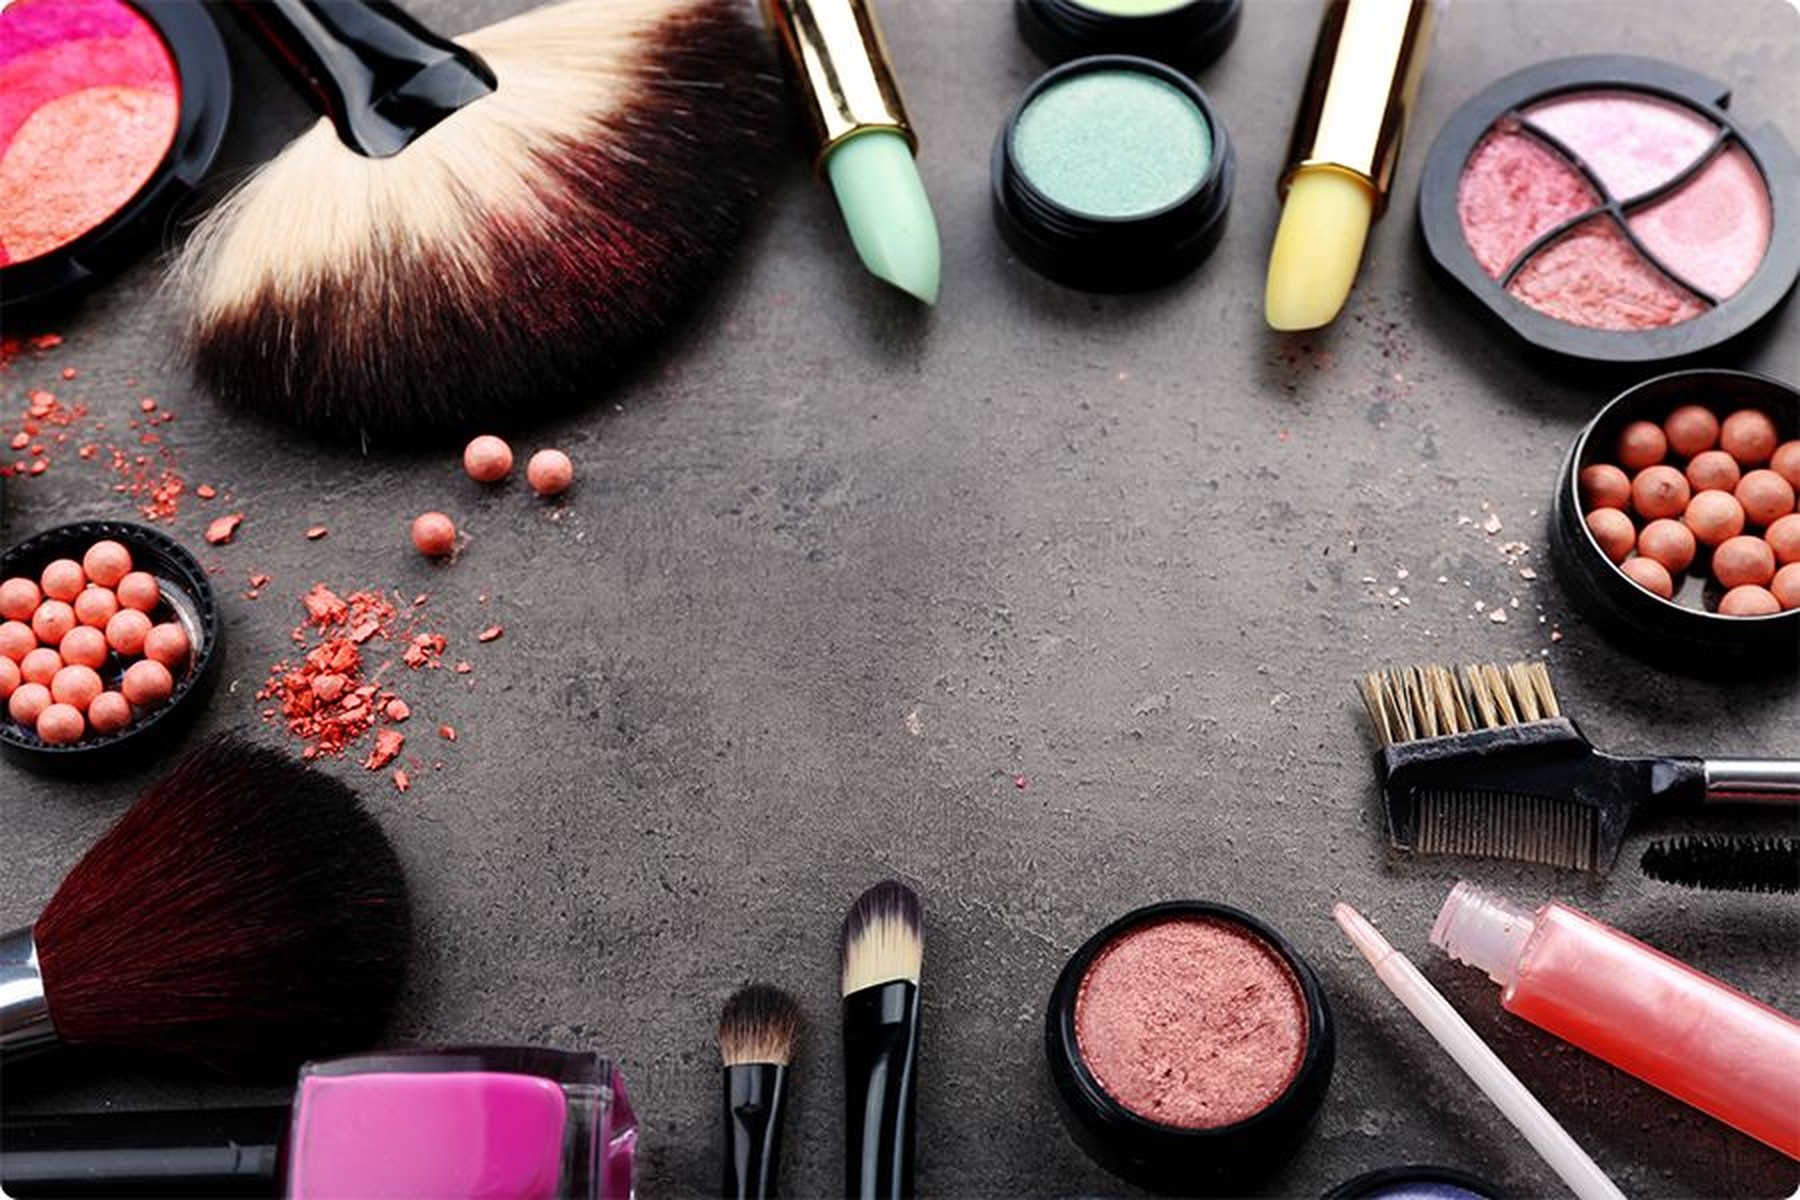 How to win at life and succeed in your beauty goals